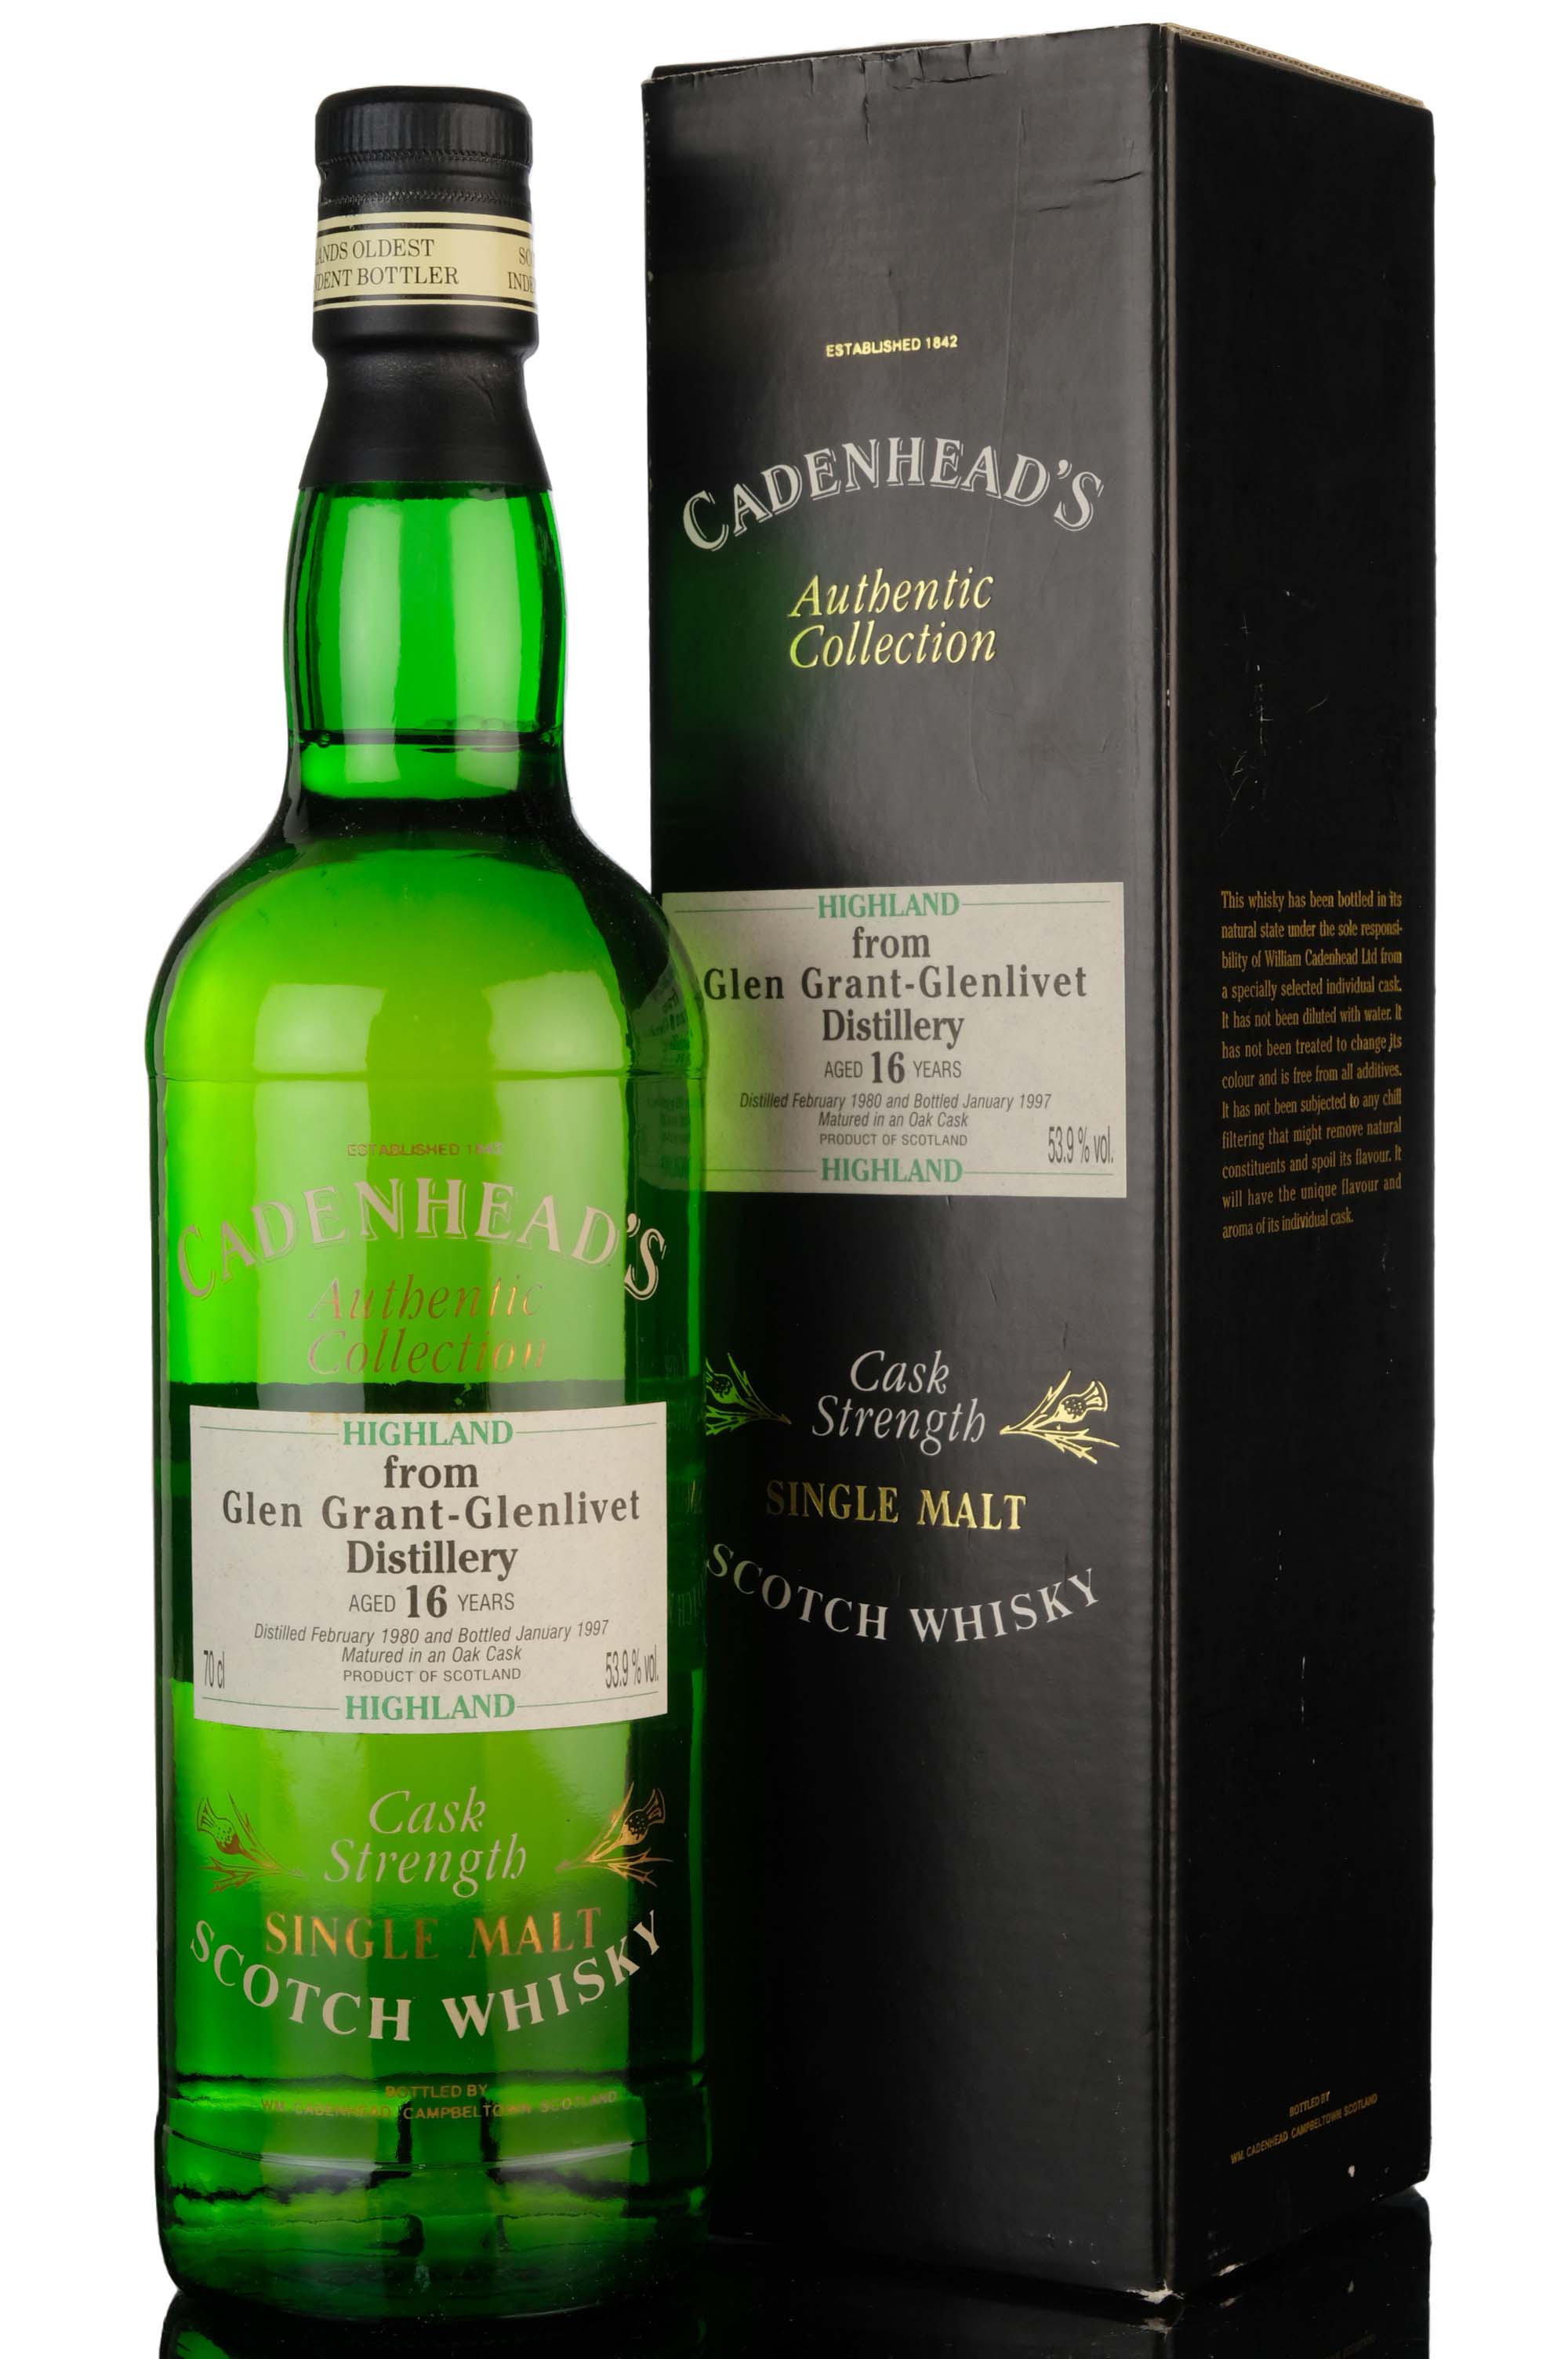 Glen Grant 1980-1997 - 16 Year Old - Cadenheads Authentic Collection